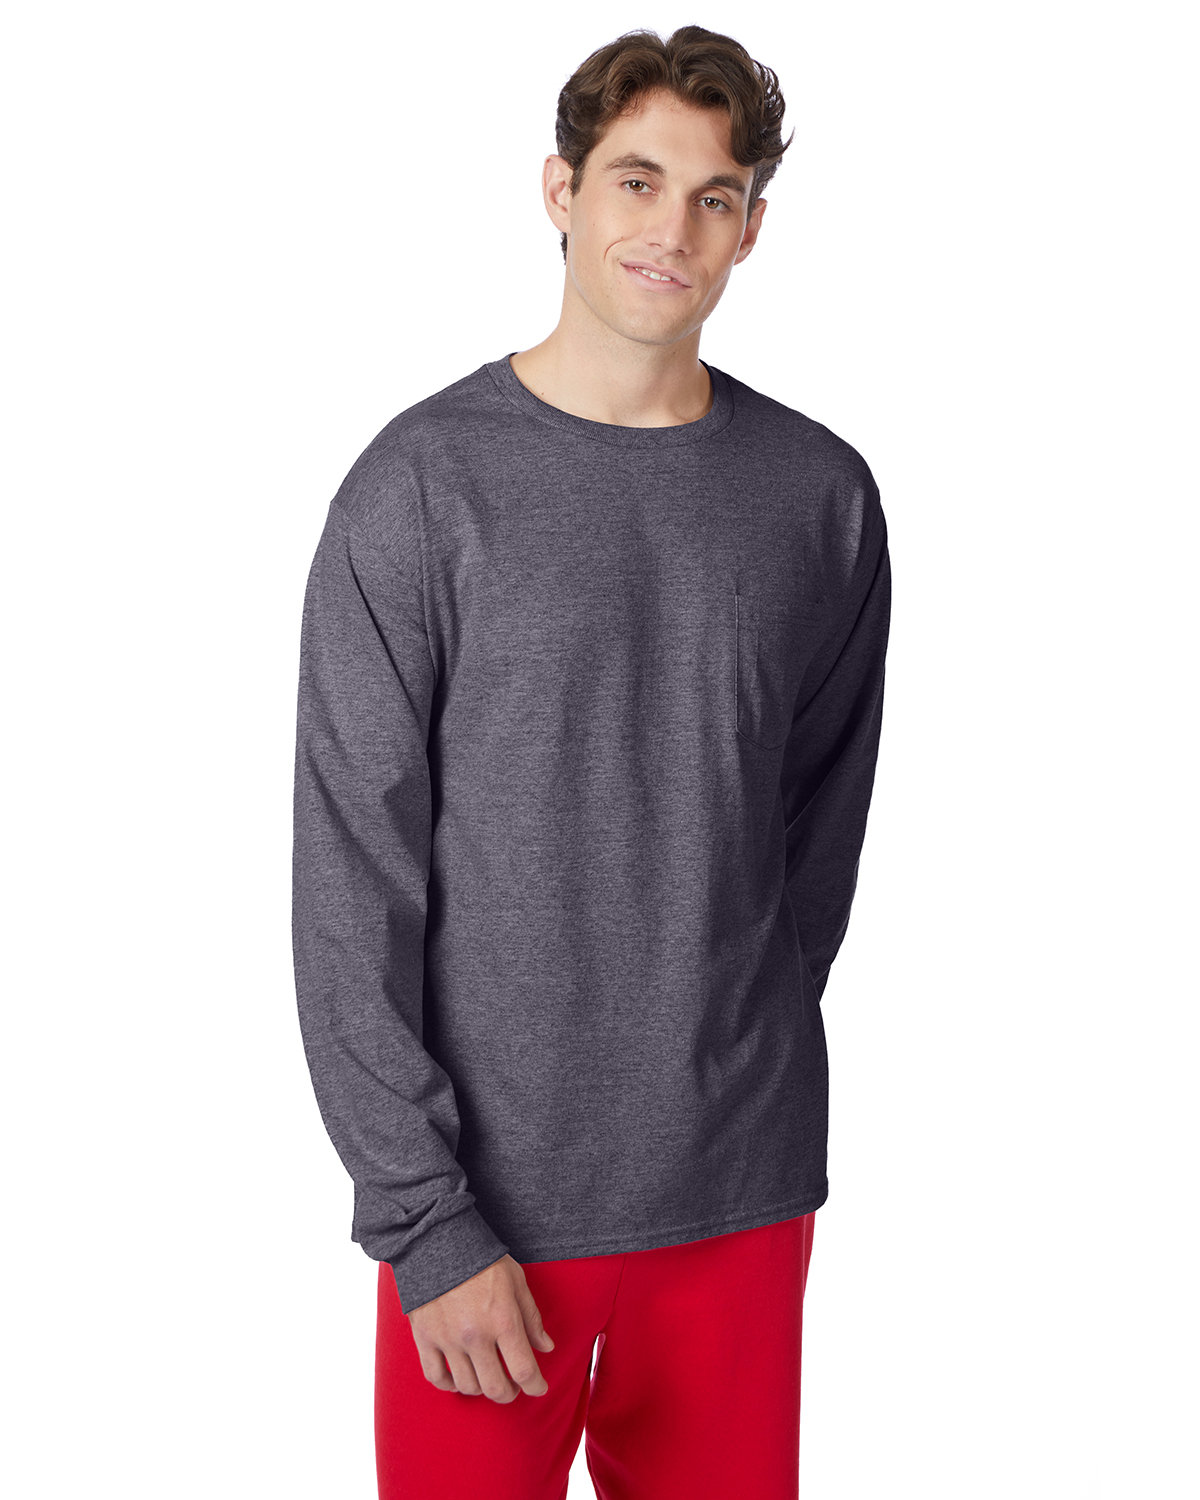 Hanes Men's Authentic-T Long-Sleeve Pocket T-Shirt CHARCOAL HEATHER 